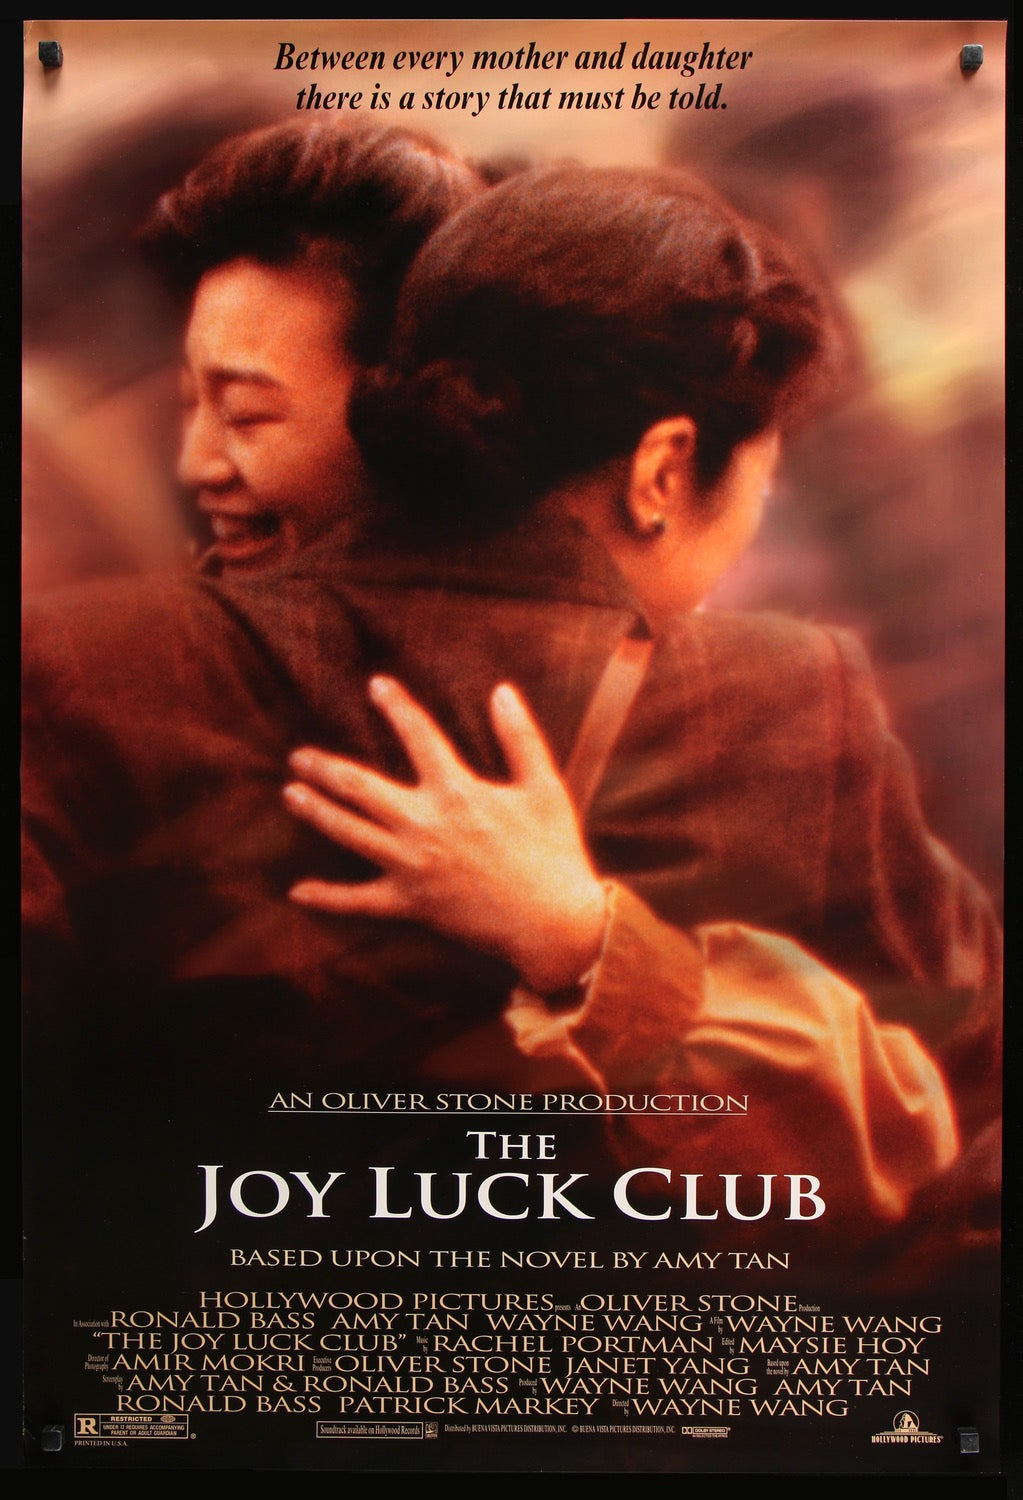 "The Joy Luck Club" movie poster, one of our favorite movies that explores female relationships!